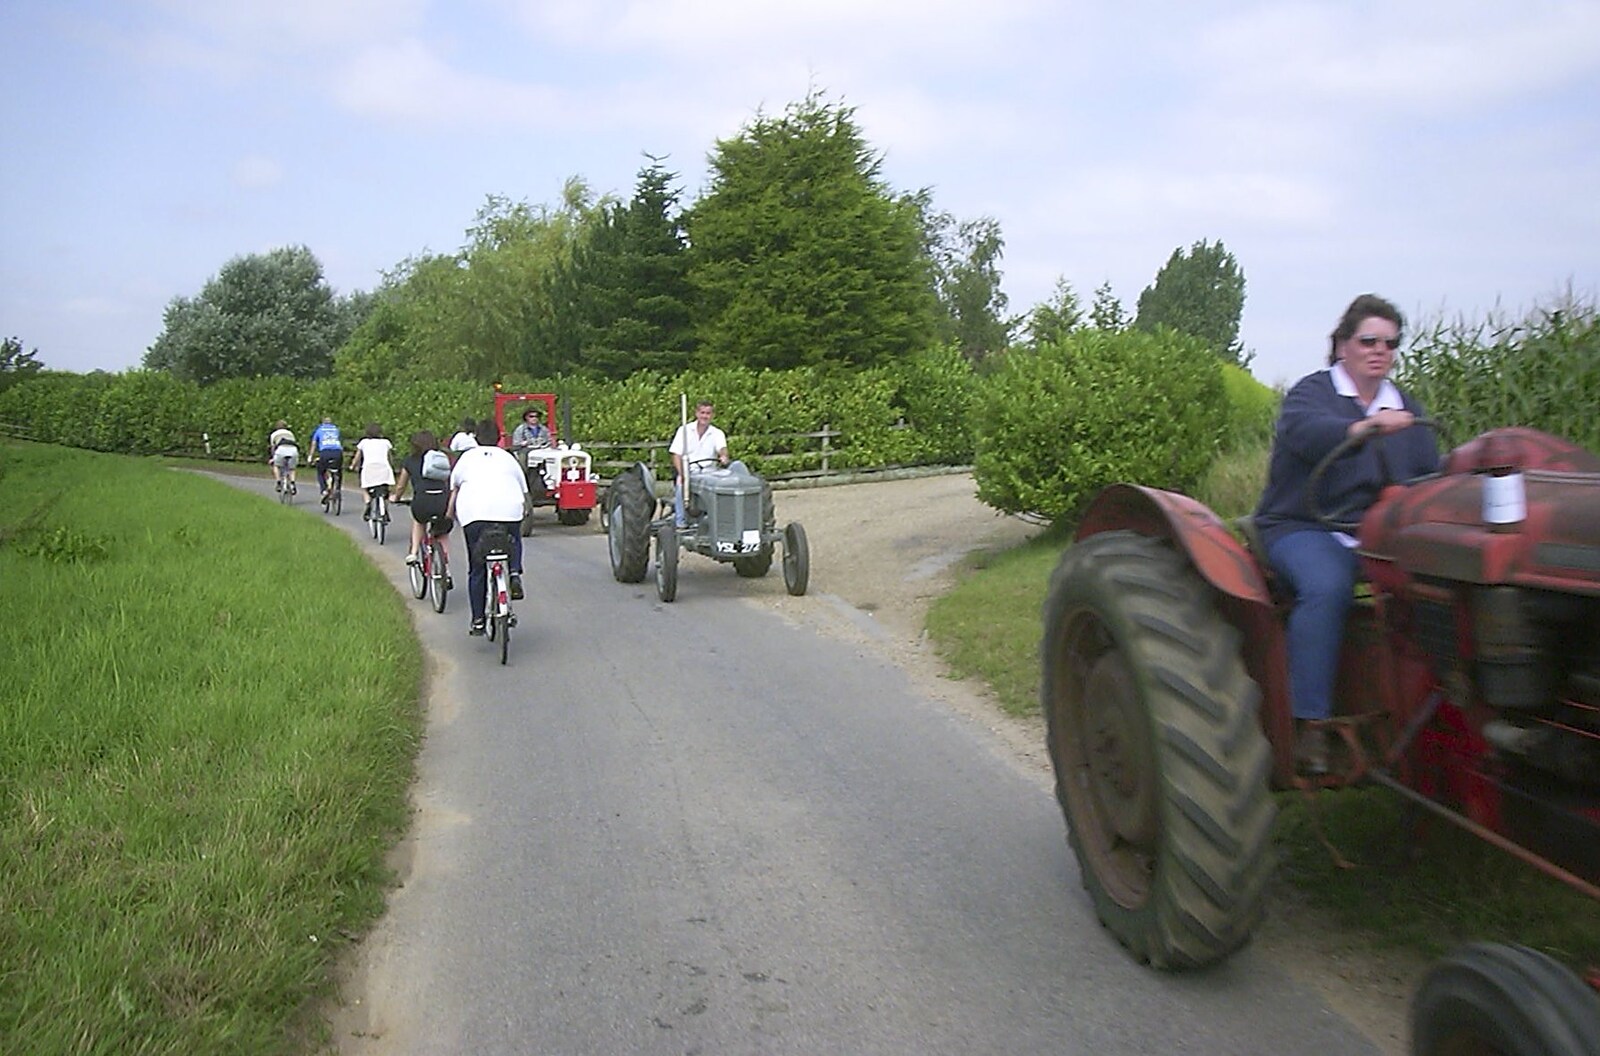 A BSCC Splinter Group Camping Trip, Shottisham, Suffolk - 13th August 2004: More vintage tractors trundle by